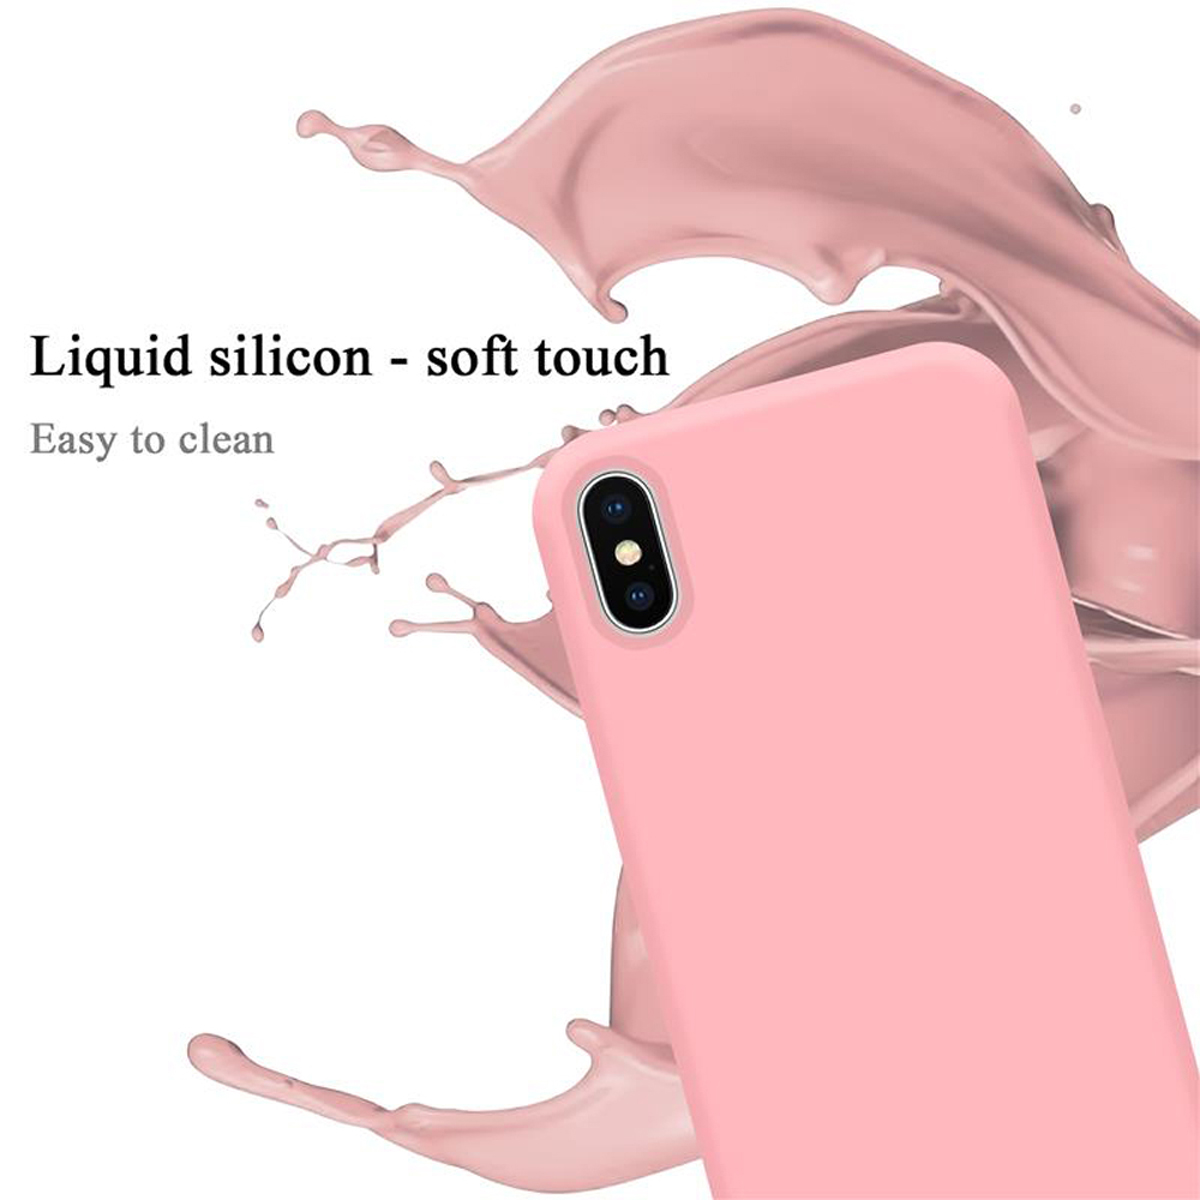 Hülle iPhone Silicone Apple, Backcover, Liquid Case LIQUID PINK XS Style, MAX, CADORABO im